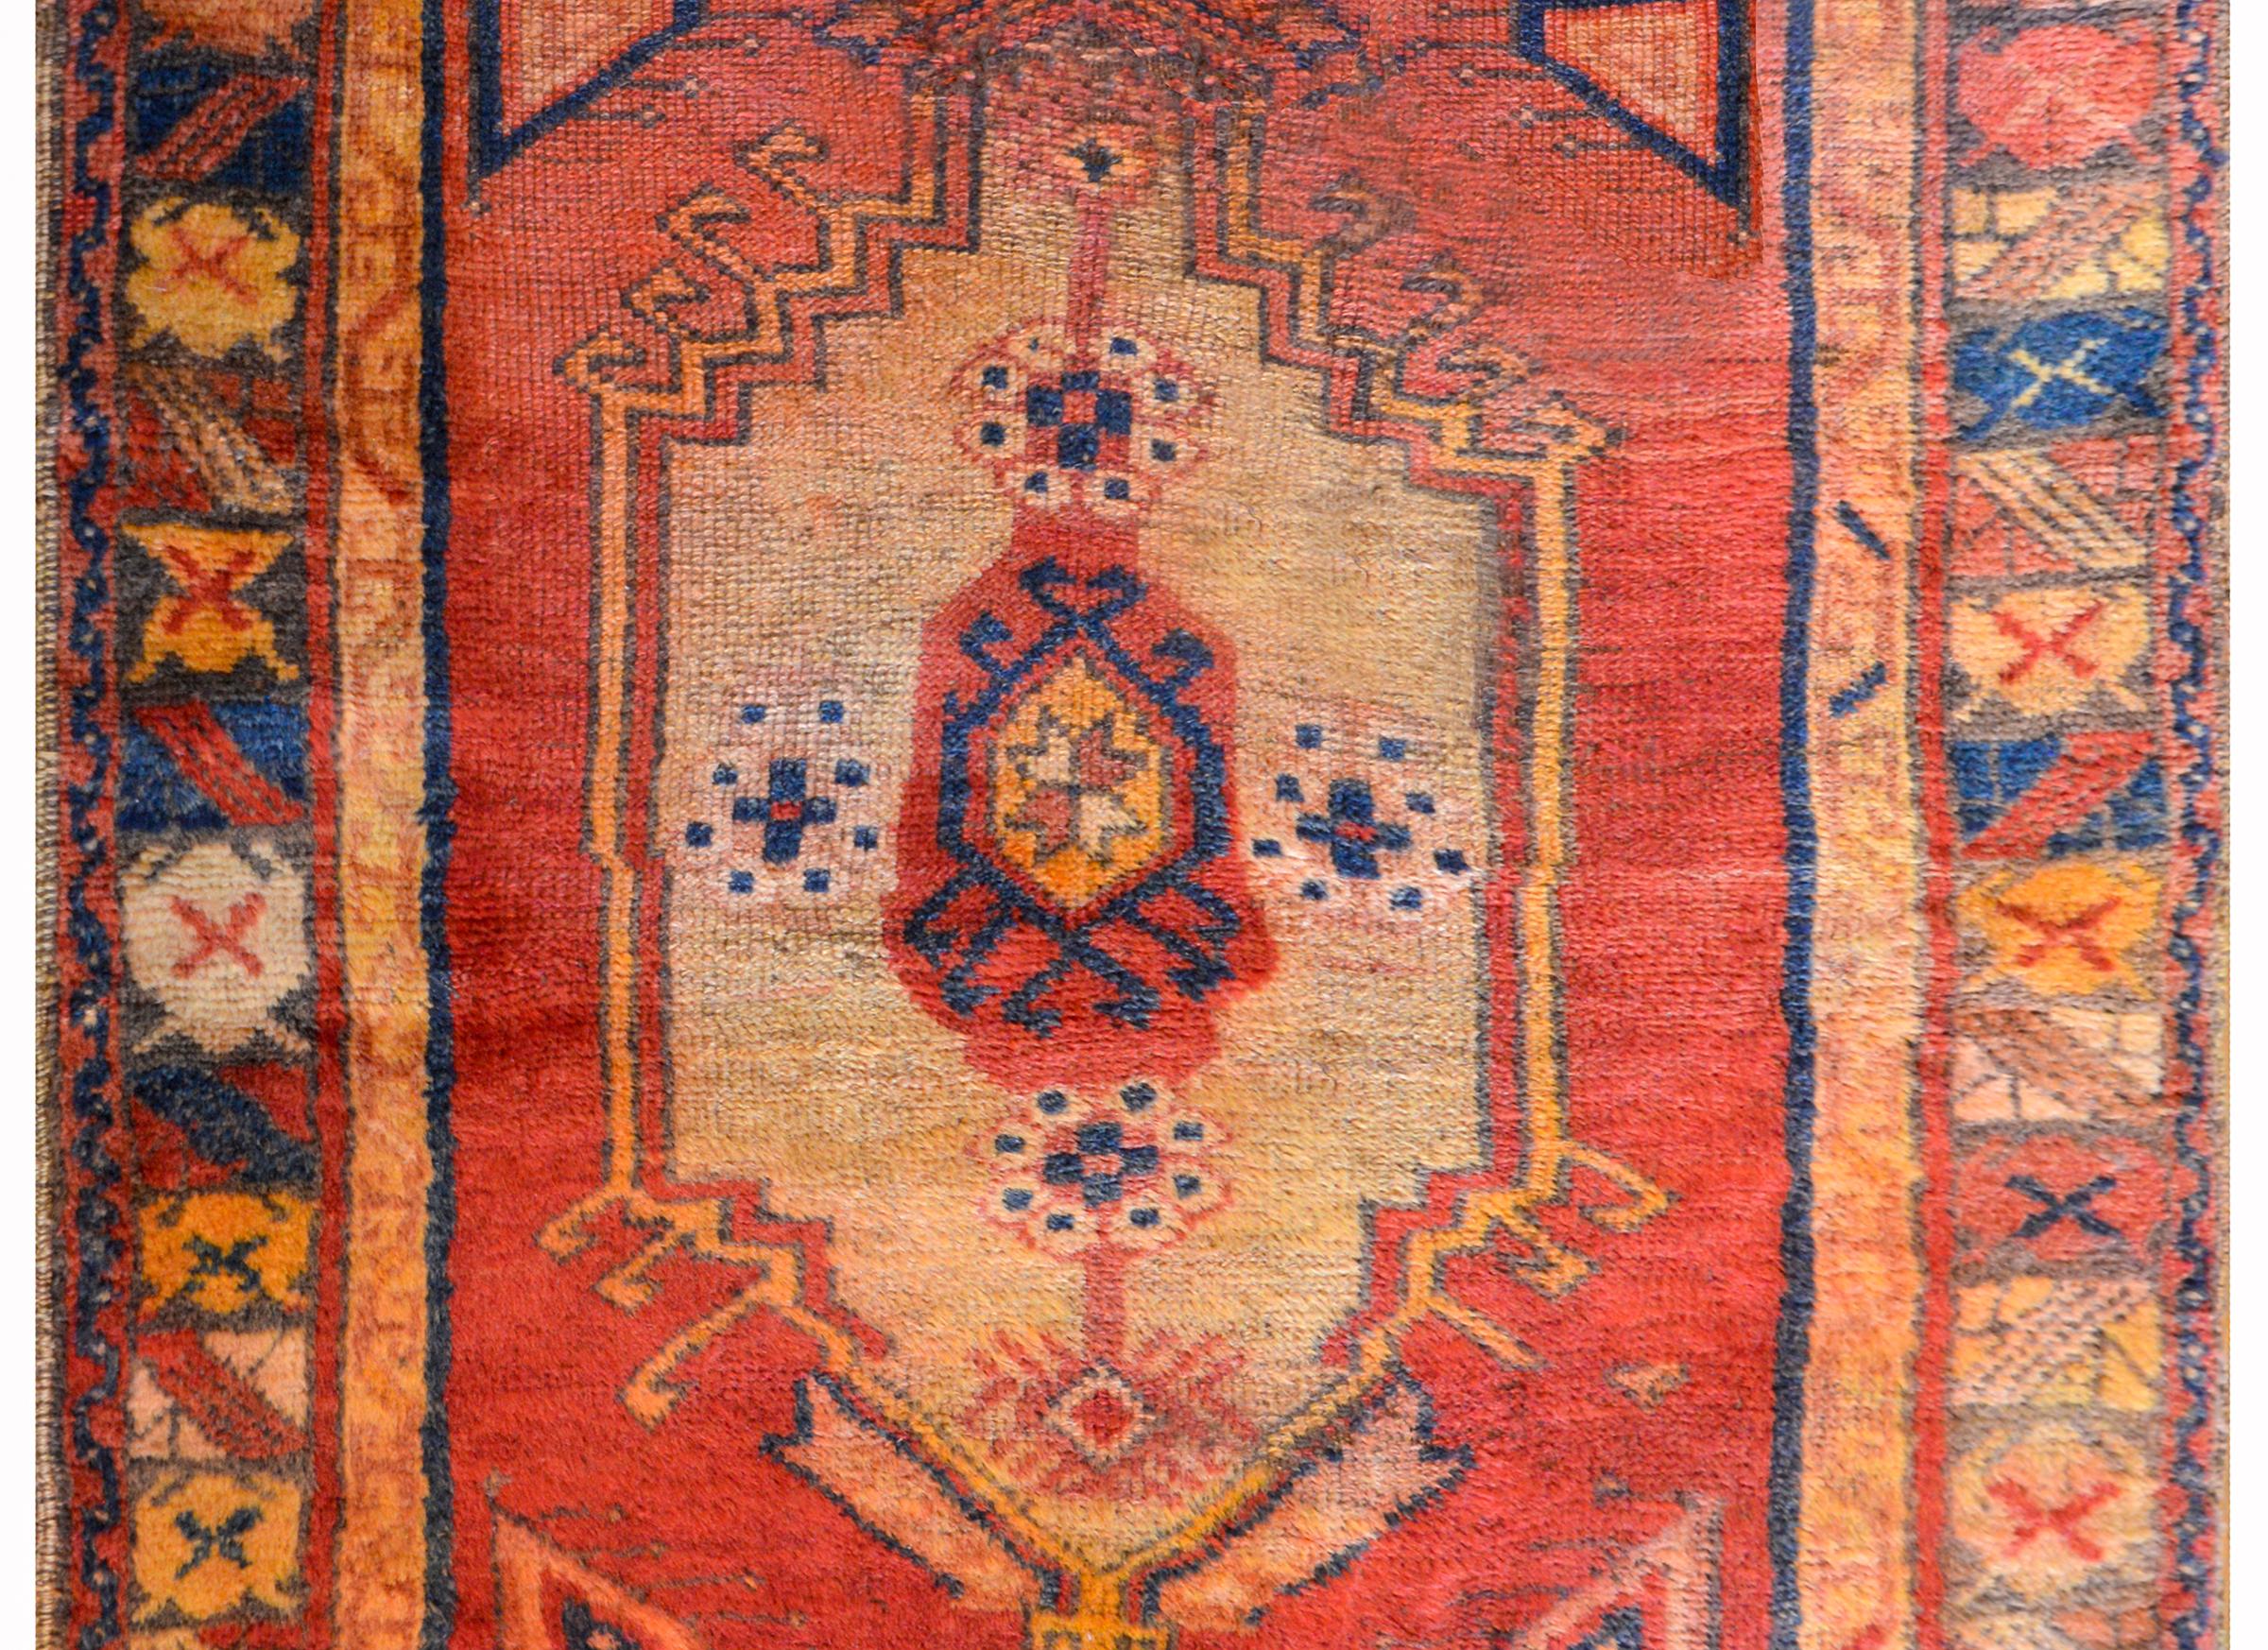 A wonderful early 20th century Turkish Anatolian rug with a large central medallion woven in indigo, cream, orange, and crimson, on a rich crimson background surrounded by multiple stylized floral patterned stripes.